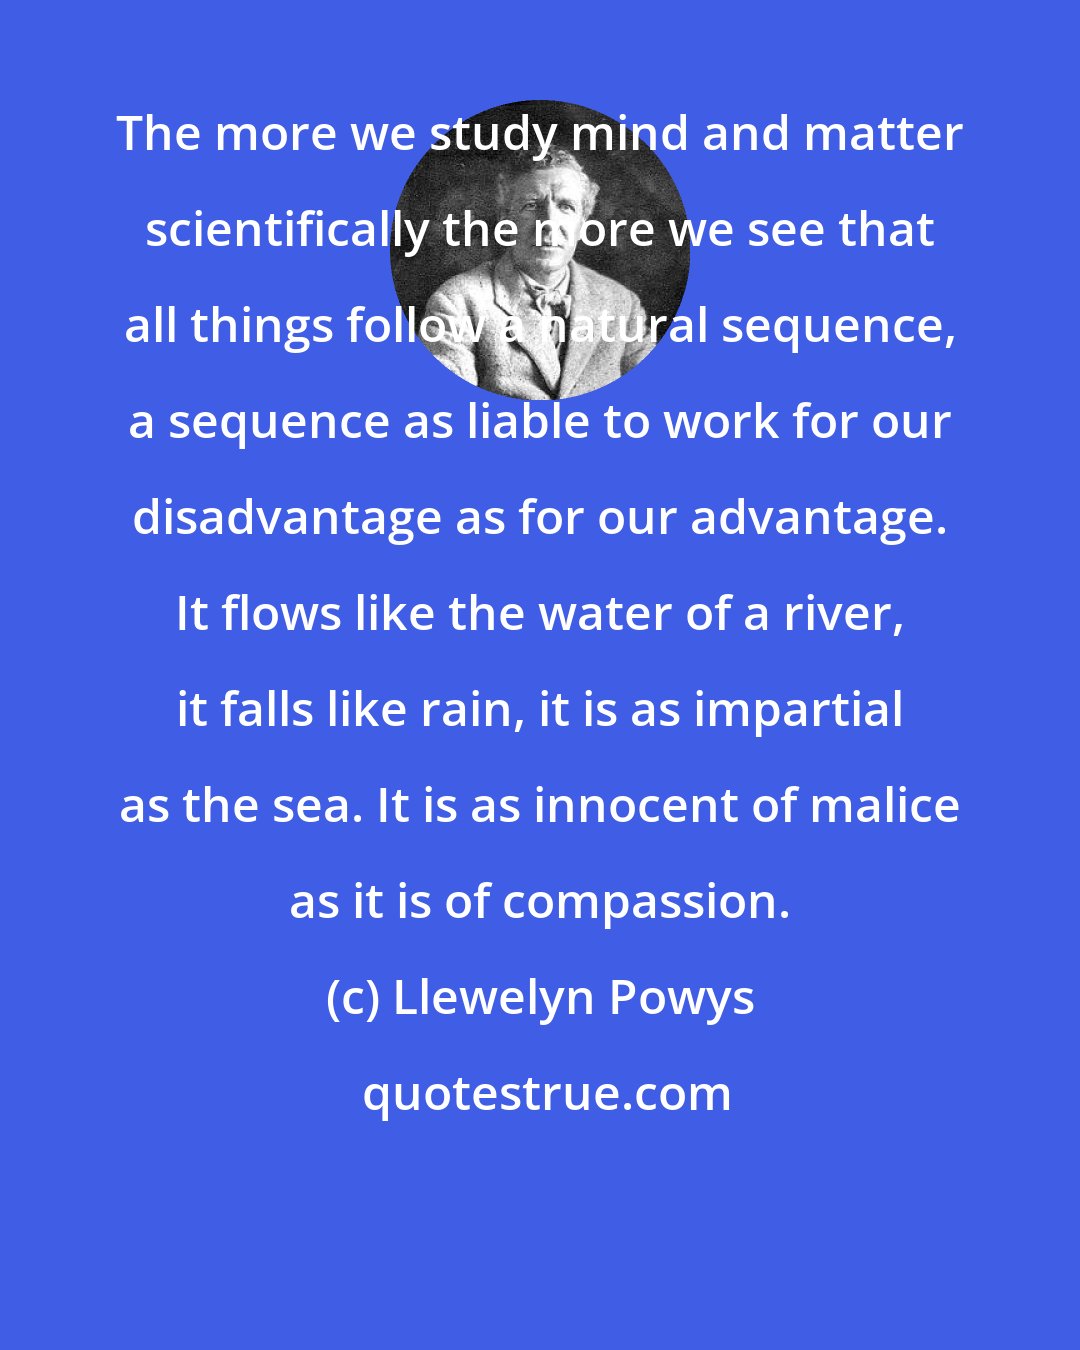 Llewelyn Powys: The more we study mind and matter scientifically the more we see that all things follow a natural sequence, a sequence as liable to work for our disadvantage as for our advantage. It flows like the water of a river, it falls like rain, it is as impartial as the sea. It is as innocent of malice as it is of compassion.